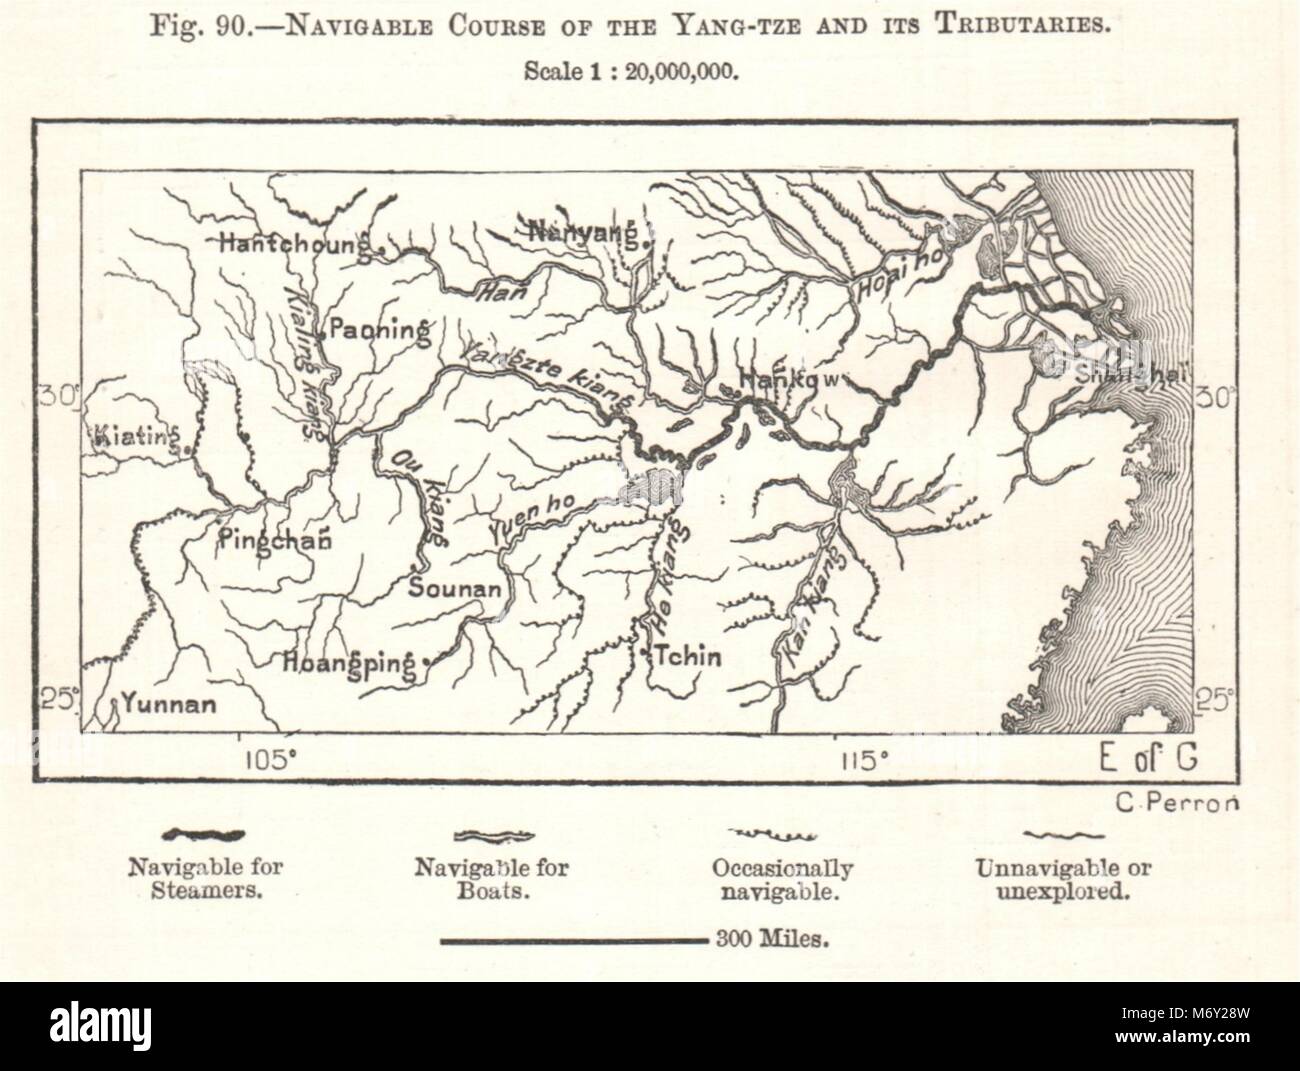 Navigable Course of the Yang-tze and its Tributaries. China. Sketch map 1885 Stock Photo